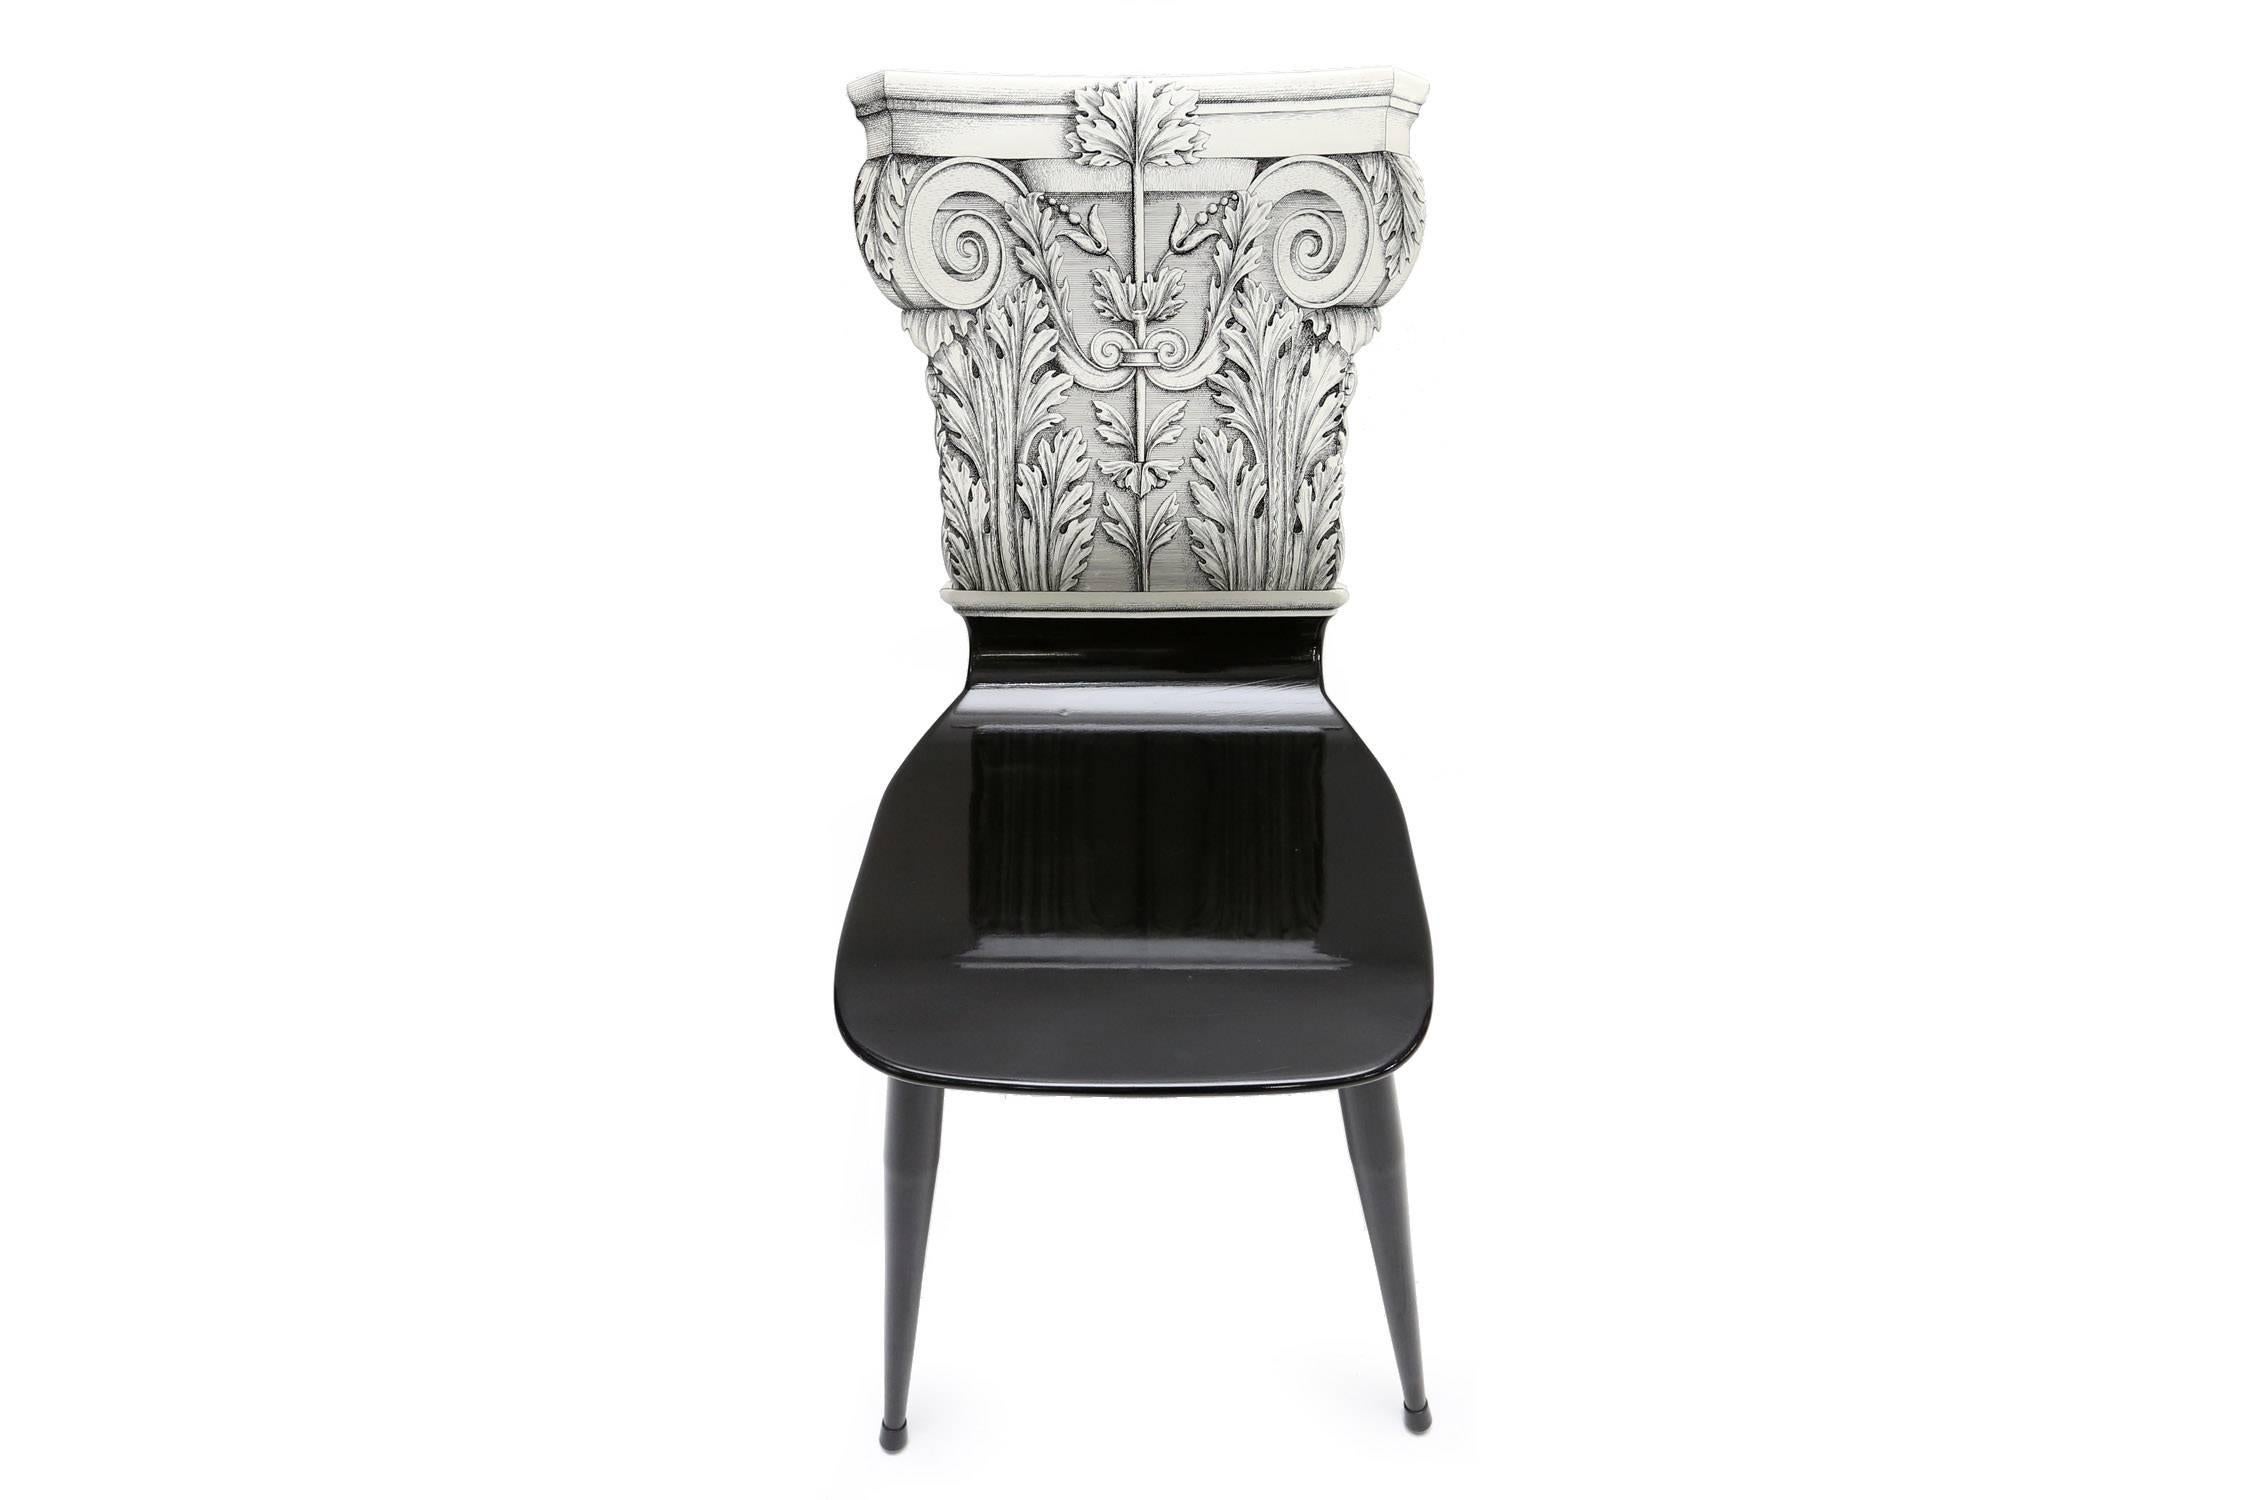 Original Fornasetti chair confirmed by Barnaba Fornasetti.
Model “Capitello corinzio”, made by his father in the 1980s.
Lithographically printed on lacquered wood.
Measures: H 91 cm, D 54 cm, L 41 cm, SH 42 cm.
 